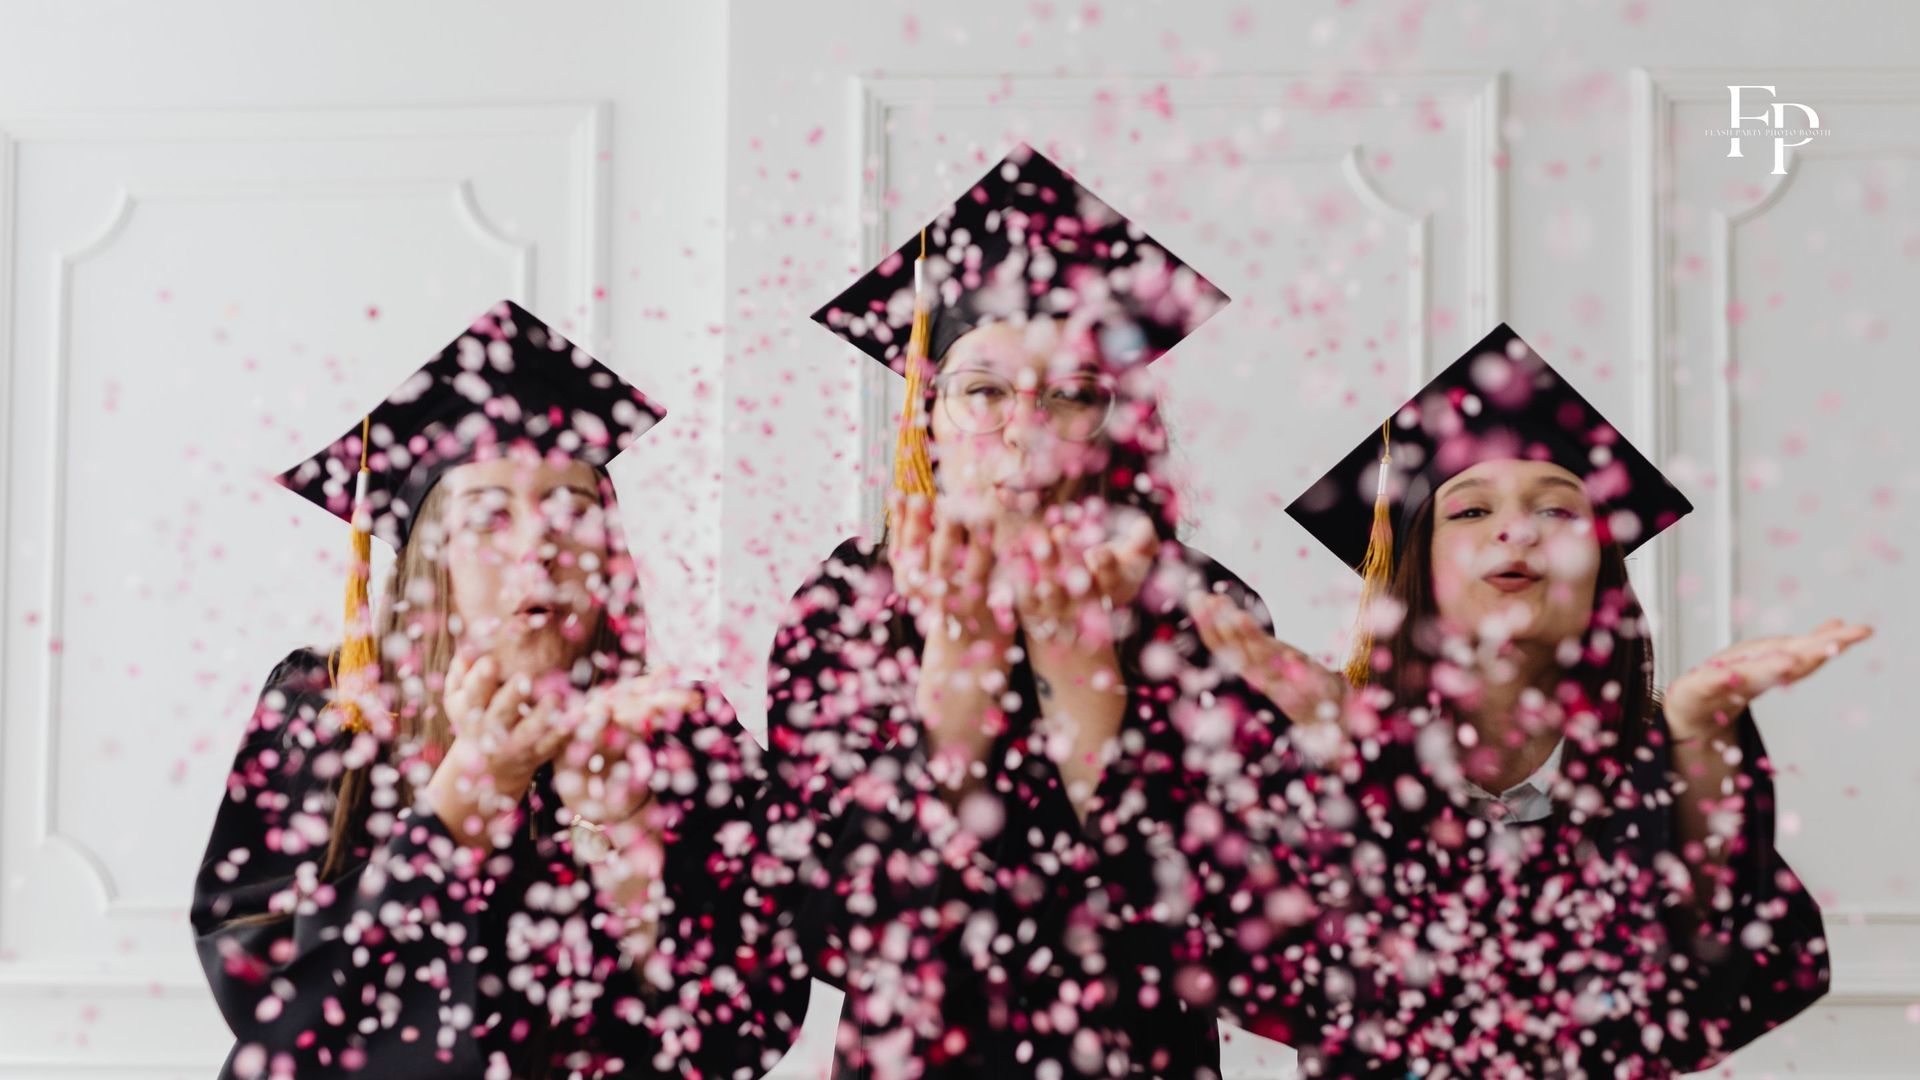 Three women posing at a graduation party in Manor surrounded by confetti